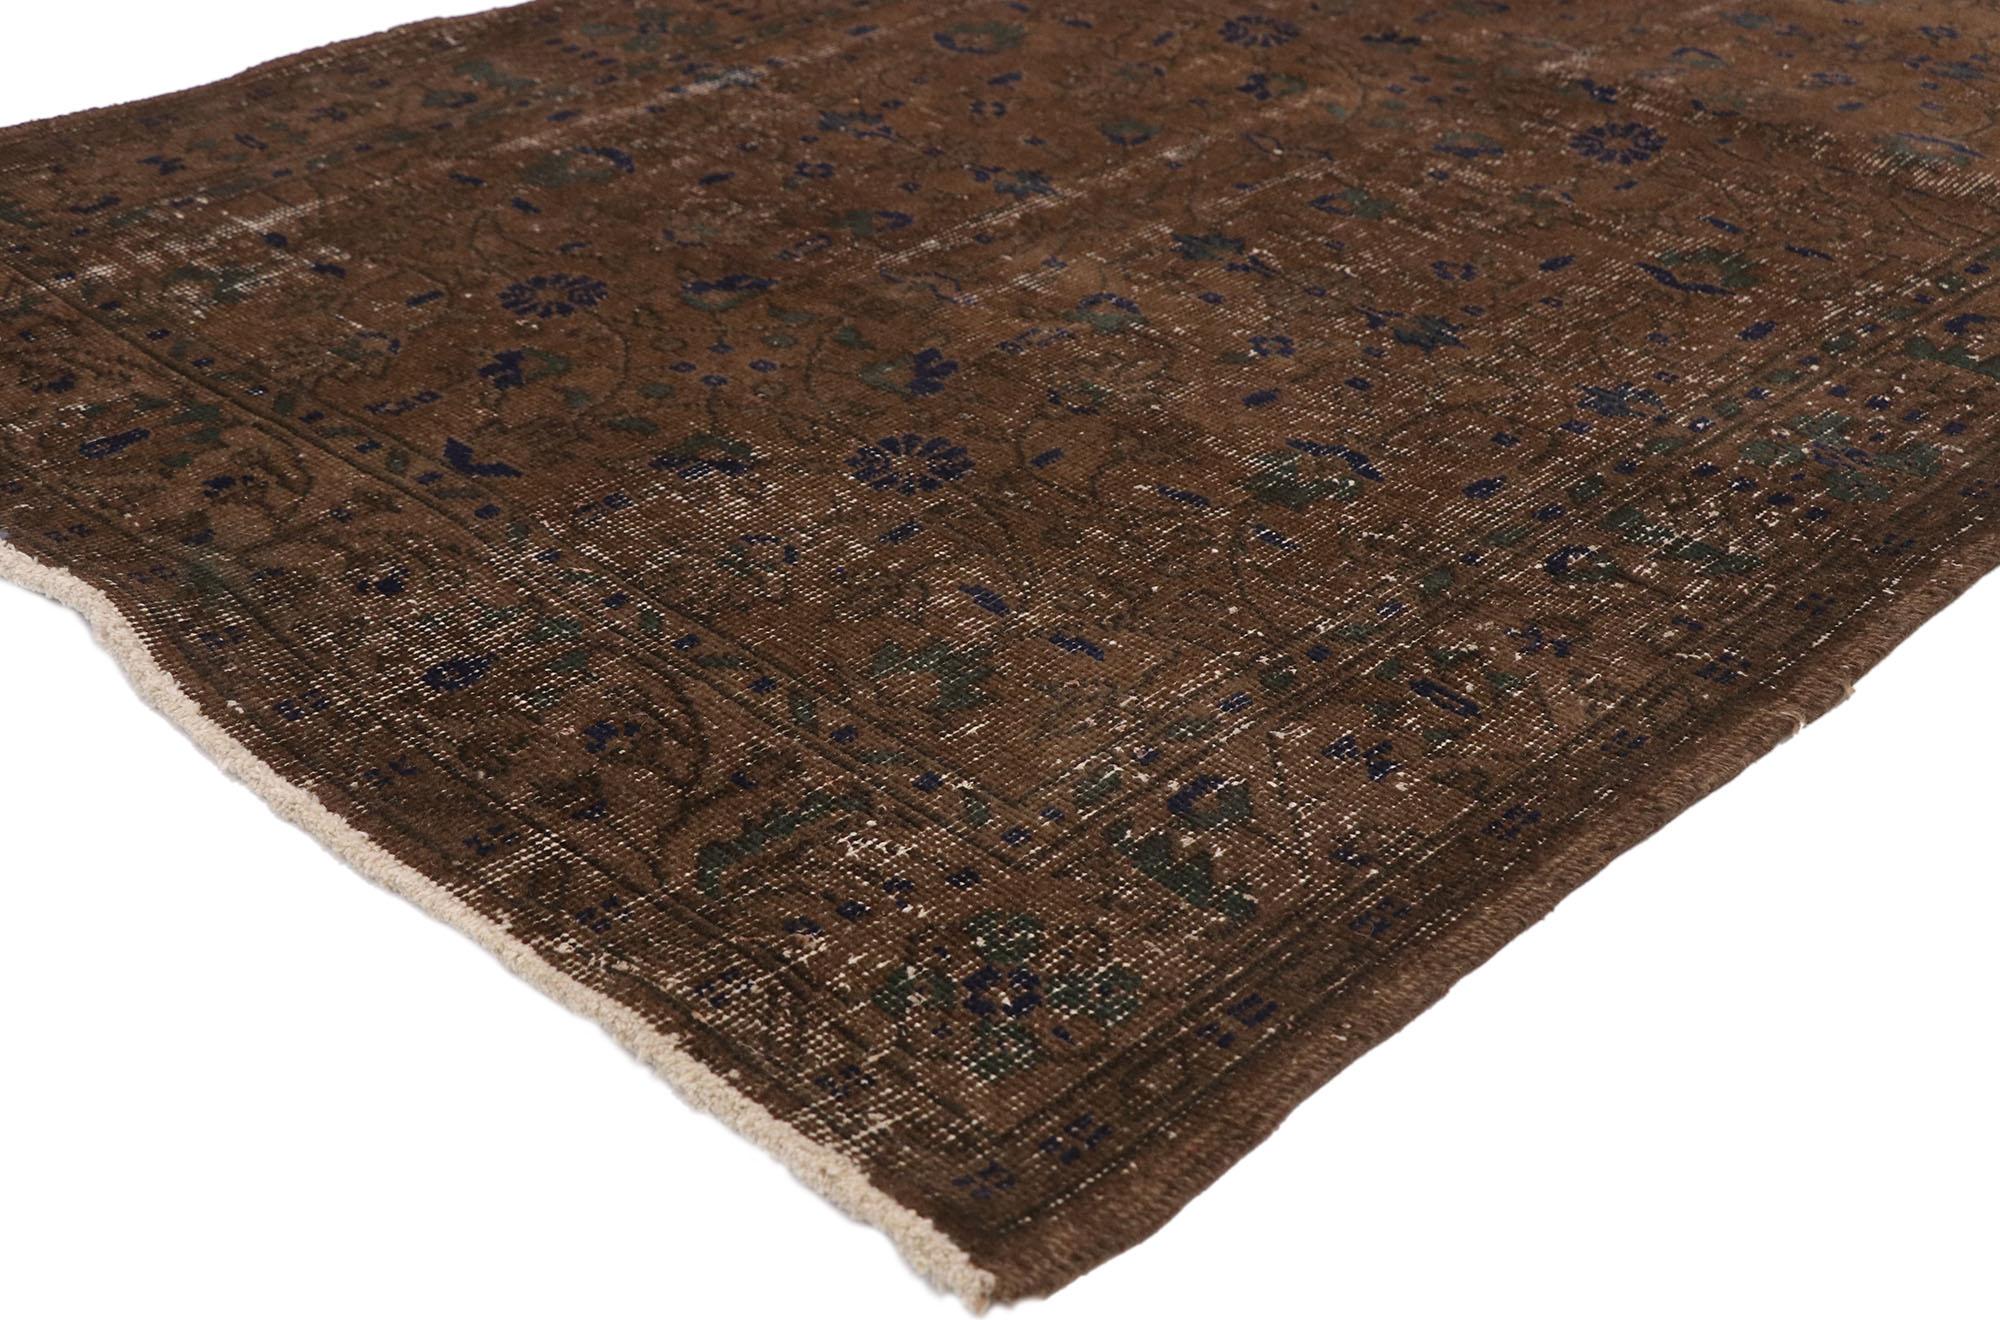 51106 distressed vintage Turkish Sivas rug with Rustic Organic Modern Farmhouse style. Rustic and refined, this hand knotted wool distressed vintage Turkish Sivas rug is gorgeous whether it’s used as an accent or powerfully used as the focal point